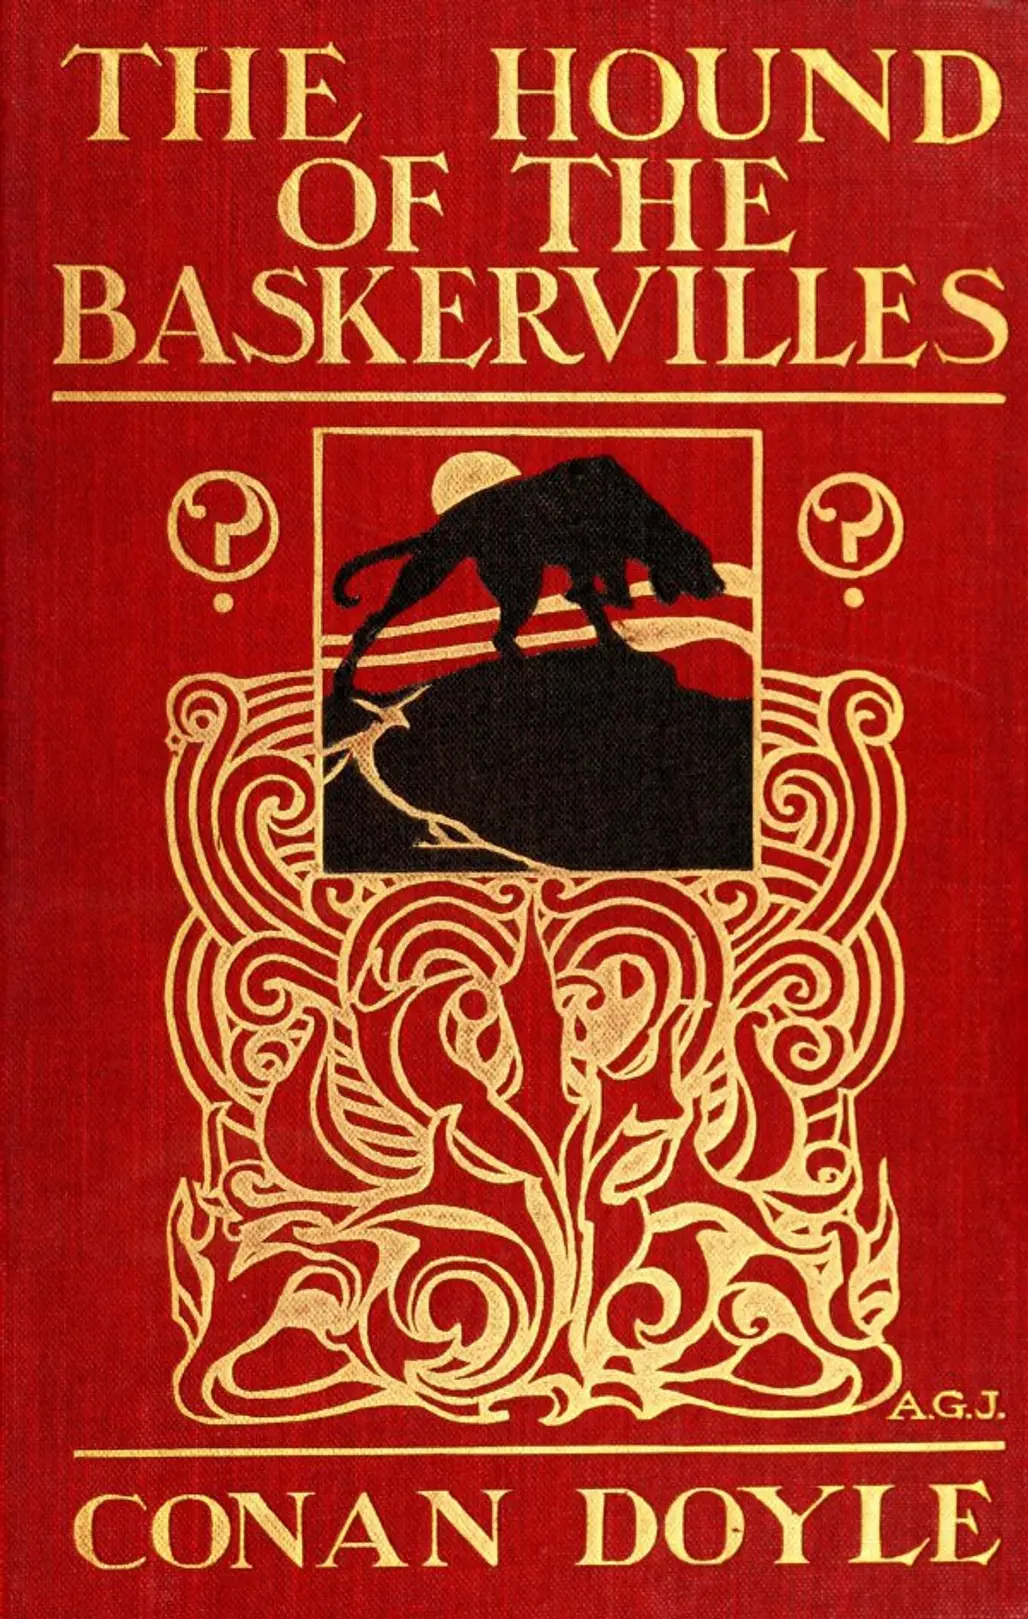 The Hound of the Baskervilles III, The Hound of the Baskervilles III, text, poster, font,